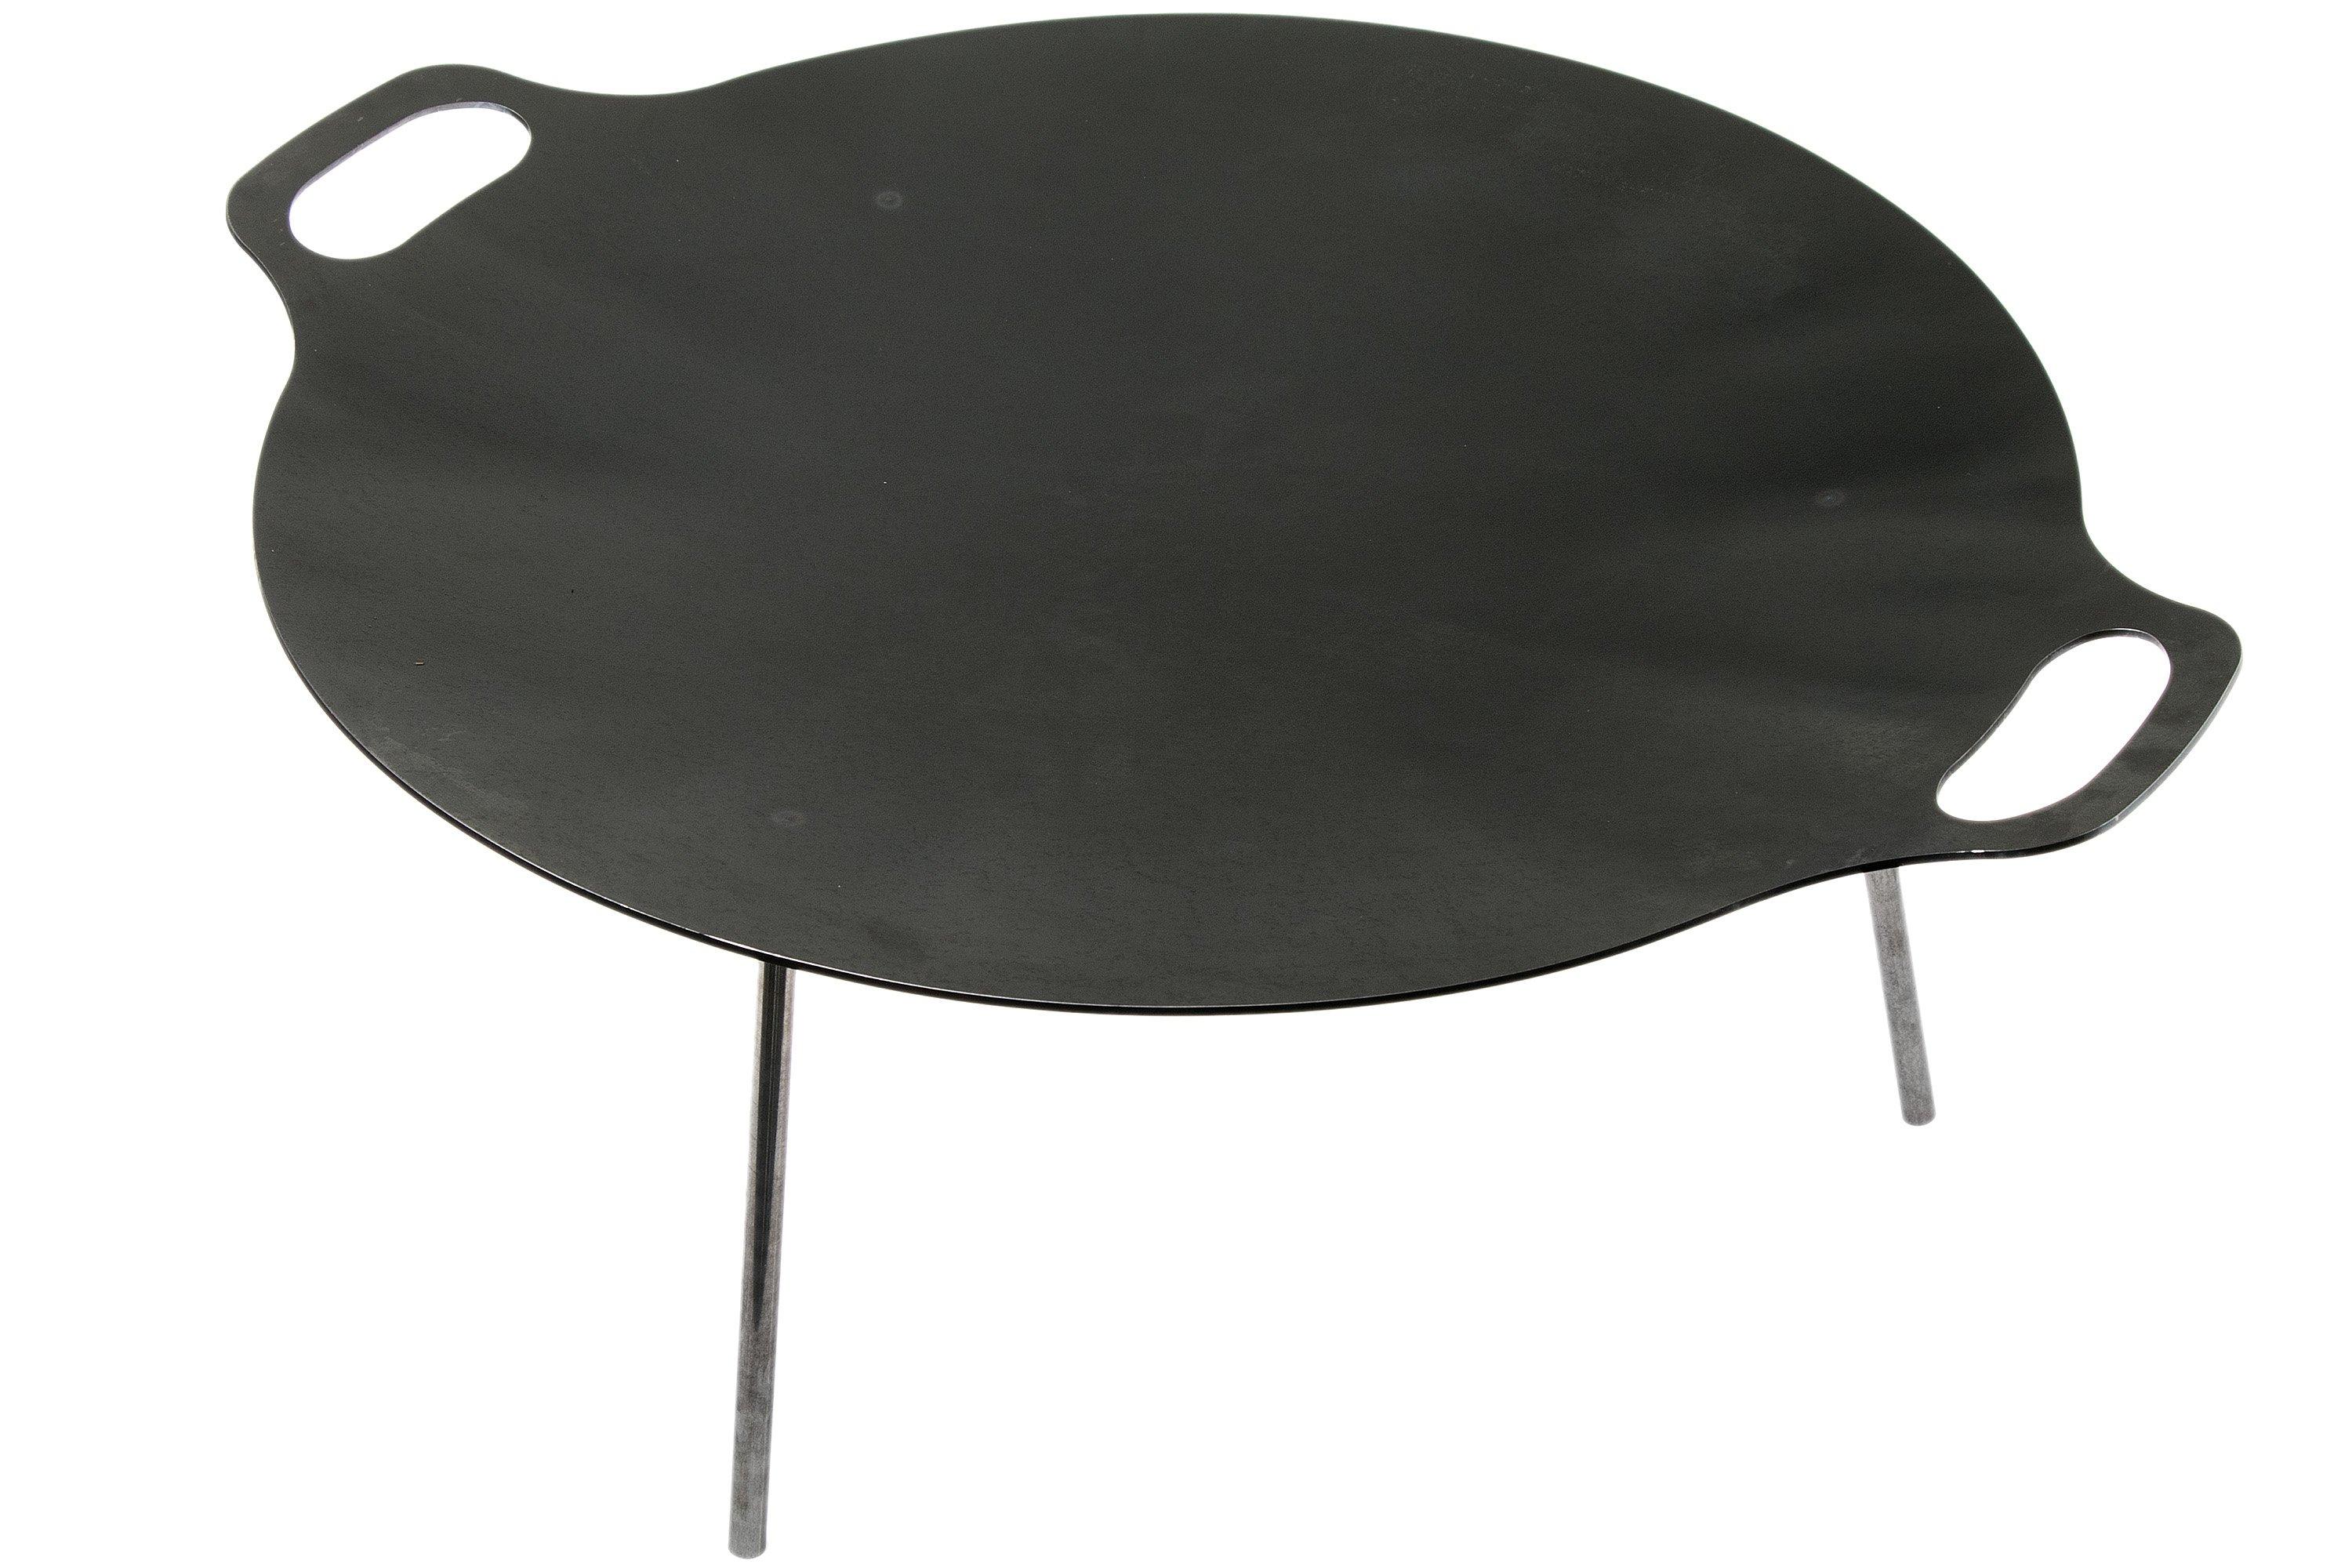 Petromax Campfire Griddle and Fire Bowl, Steel with 3 Removable